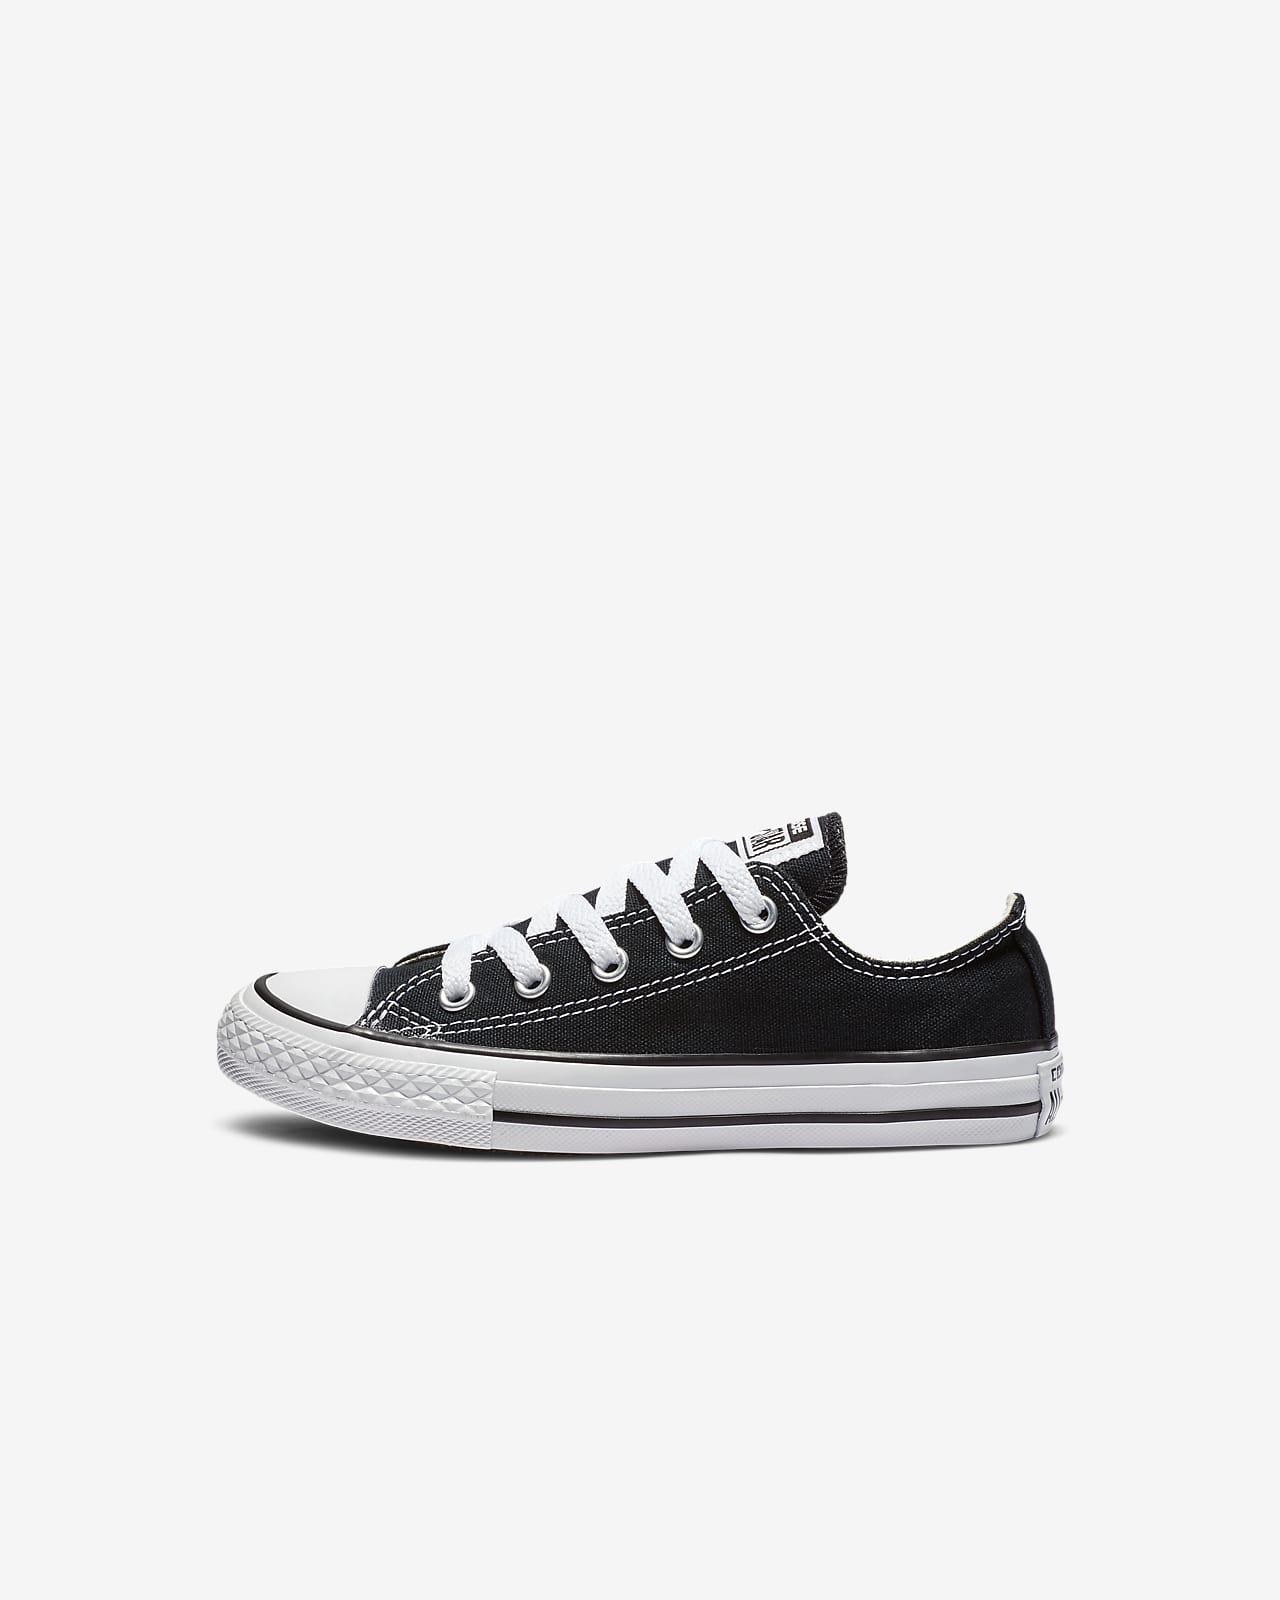 Converse Chuck Taylor All Star Low Top Little Kids' Shoes